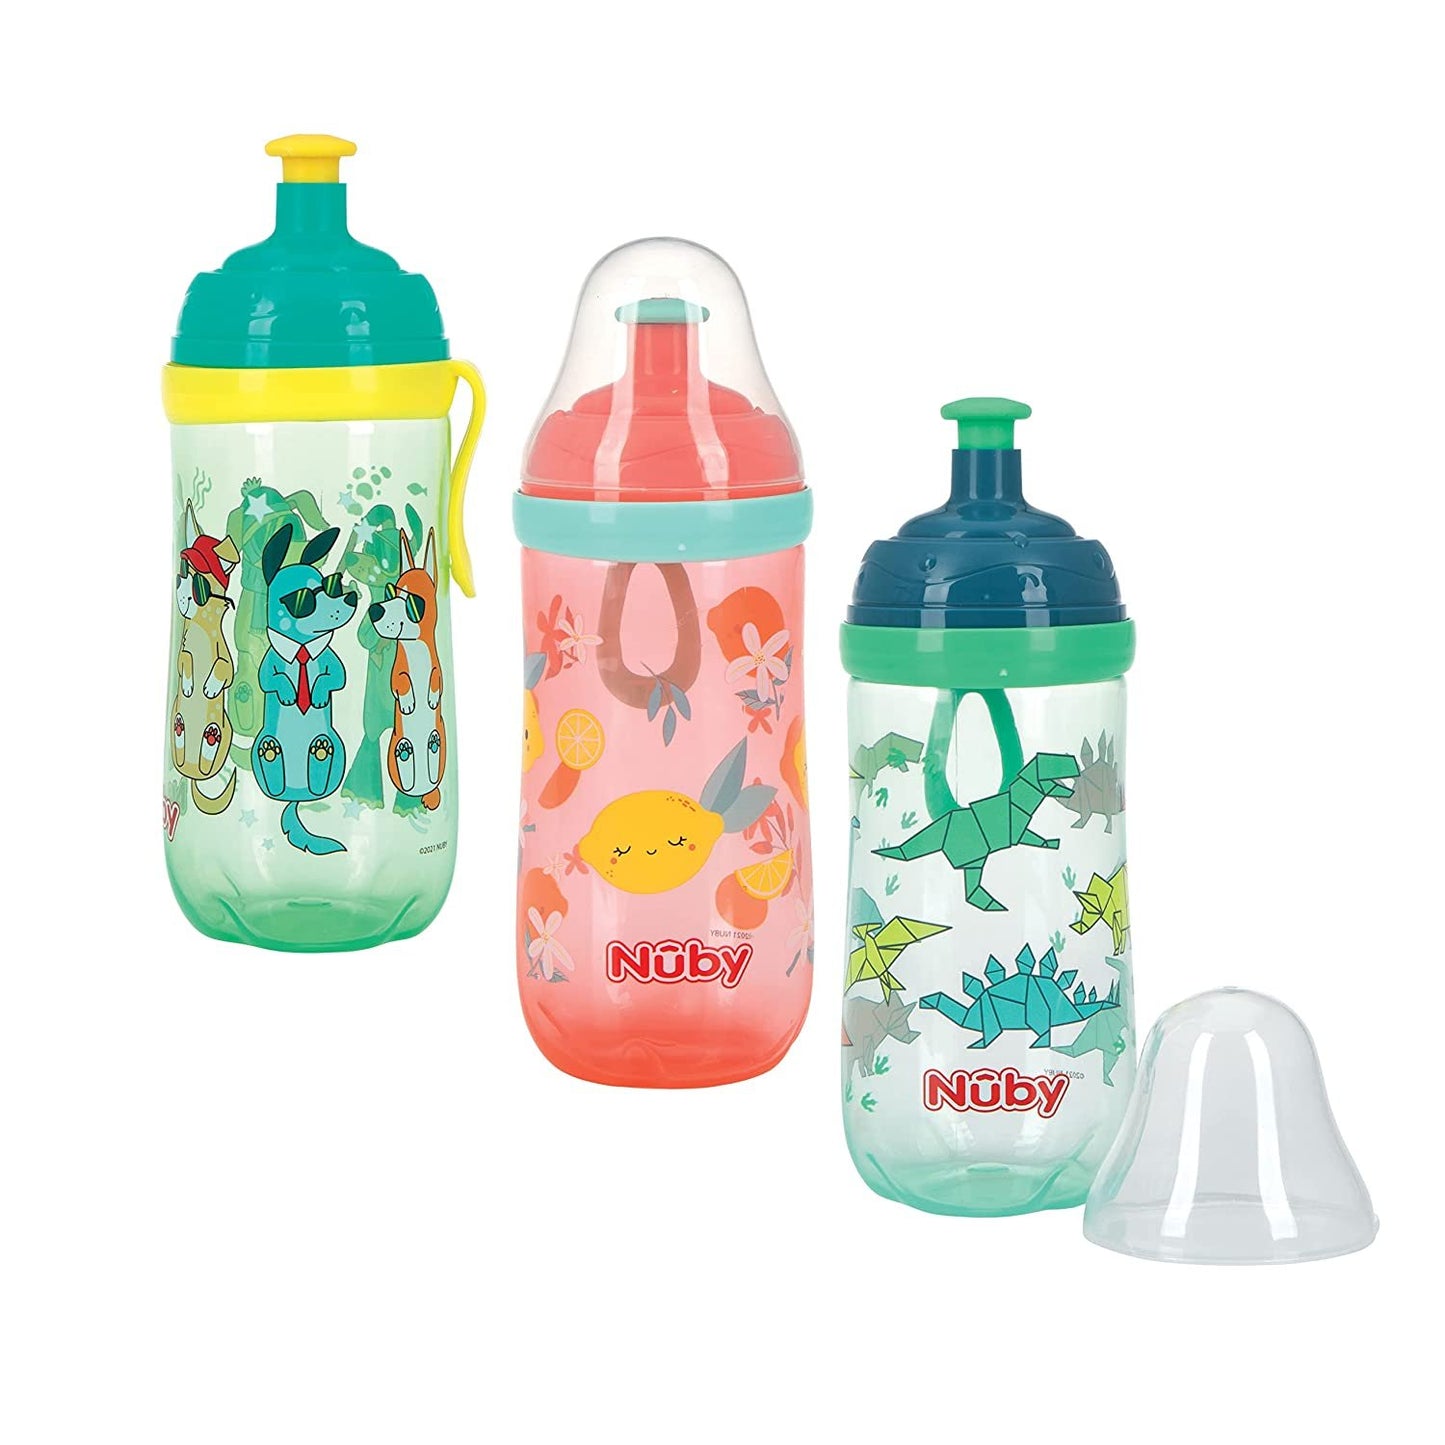 Nuby 2-Stage Busy Sipper Cup with No-Spill Silicone Spout and Free-Flow Pop-Up, 12 Ounce,Assorted( Colors/Designs May Vary)